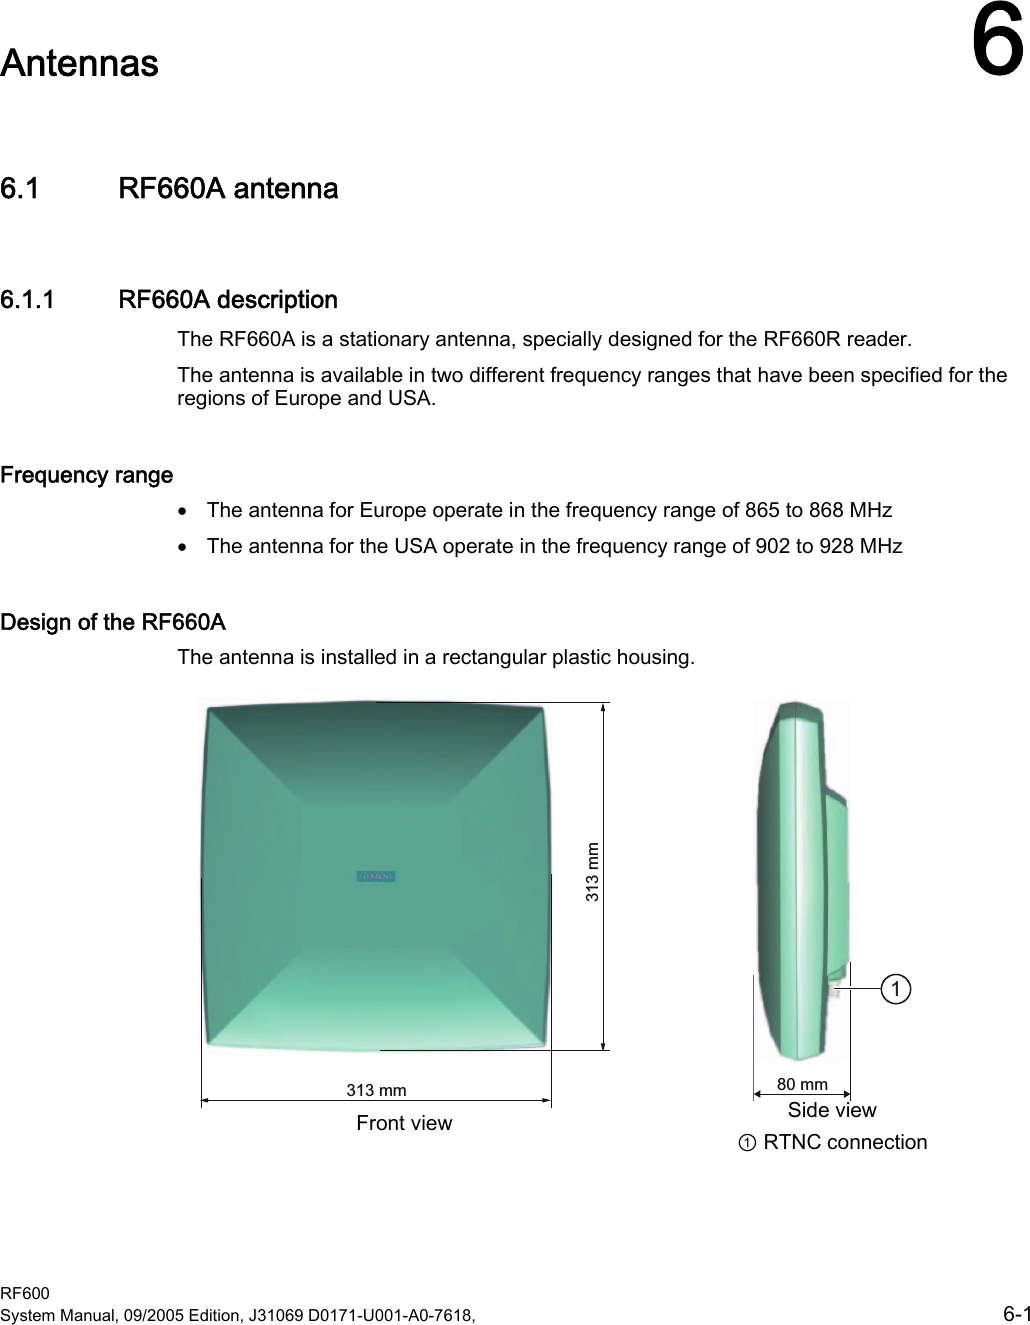  RF600 System Manual, 09/2005 Edition, J31069 D0171-U001-A0-7618,    6-1 Antennas  66.1 RF660A antenna 6.1.1 RF660A description The RF660A is a stationary antenna, specially designed for the RF660R reader. The antenna is available in two different frequency ranges that have been specified for the regions of Europe and USA. Frequency range • The antenna for Europe operate in the frequency range of 865 to 868 MHz • The antenna for the USA operate in the frequency range of 902 to 928 MHz Design of the RF660A The antenna is installed in a rectangular plastic housing.   PPPP Front view PP Side view ① RTNC connection 